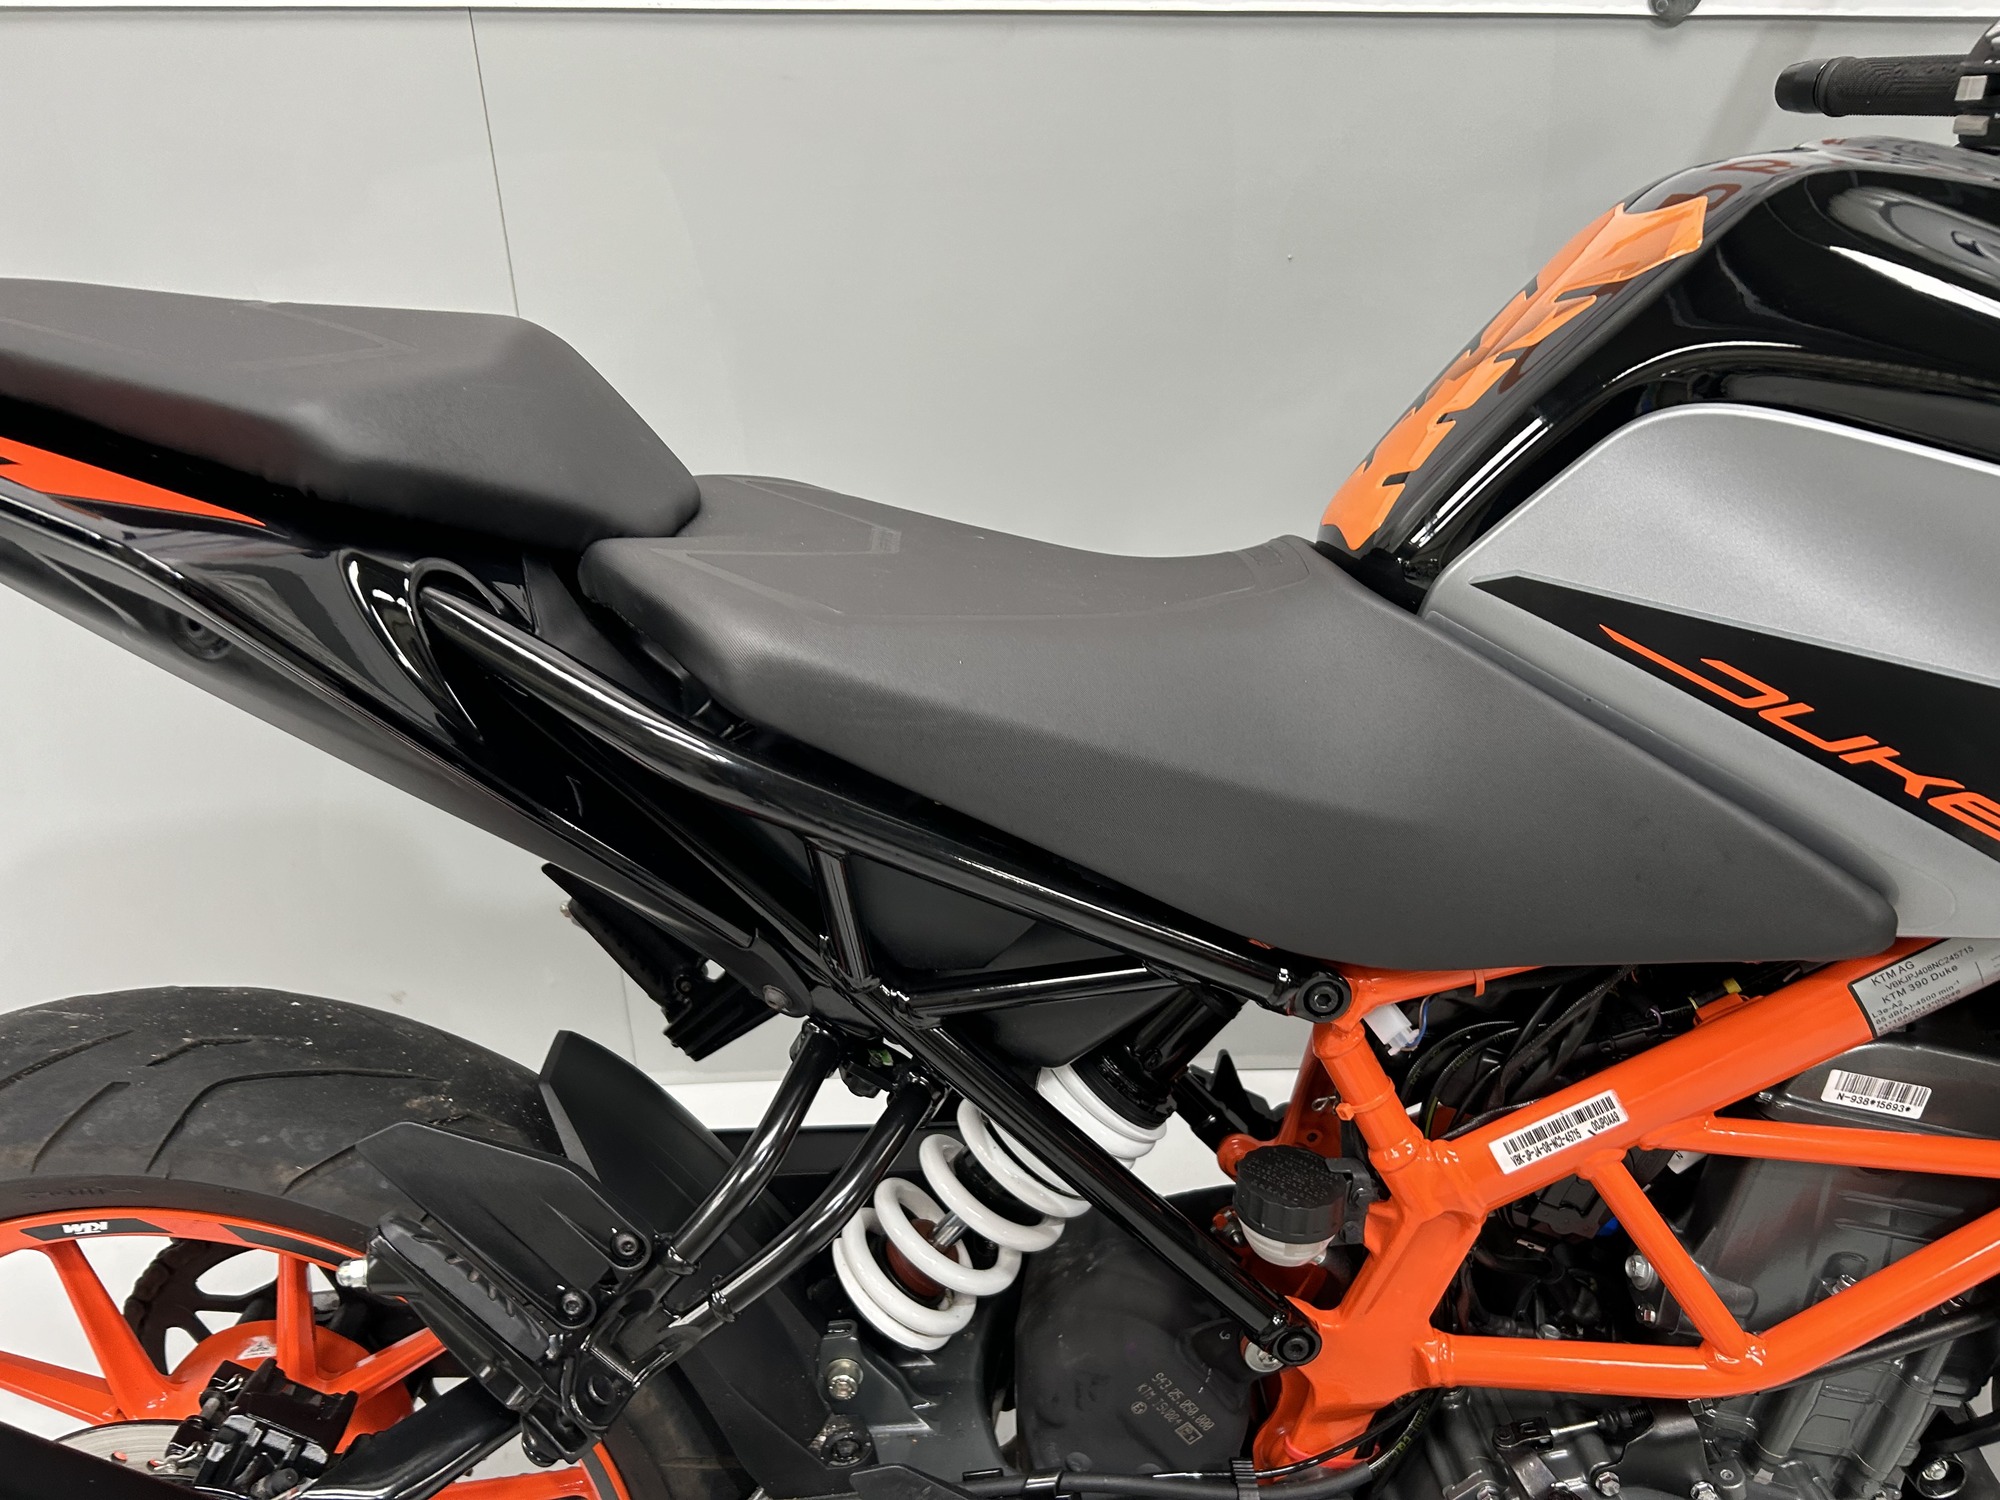 KTM 390 DUKE - NATIONWIDE DELIVERY AVAILABLE - Nationwide Motorbikes